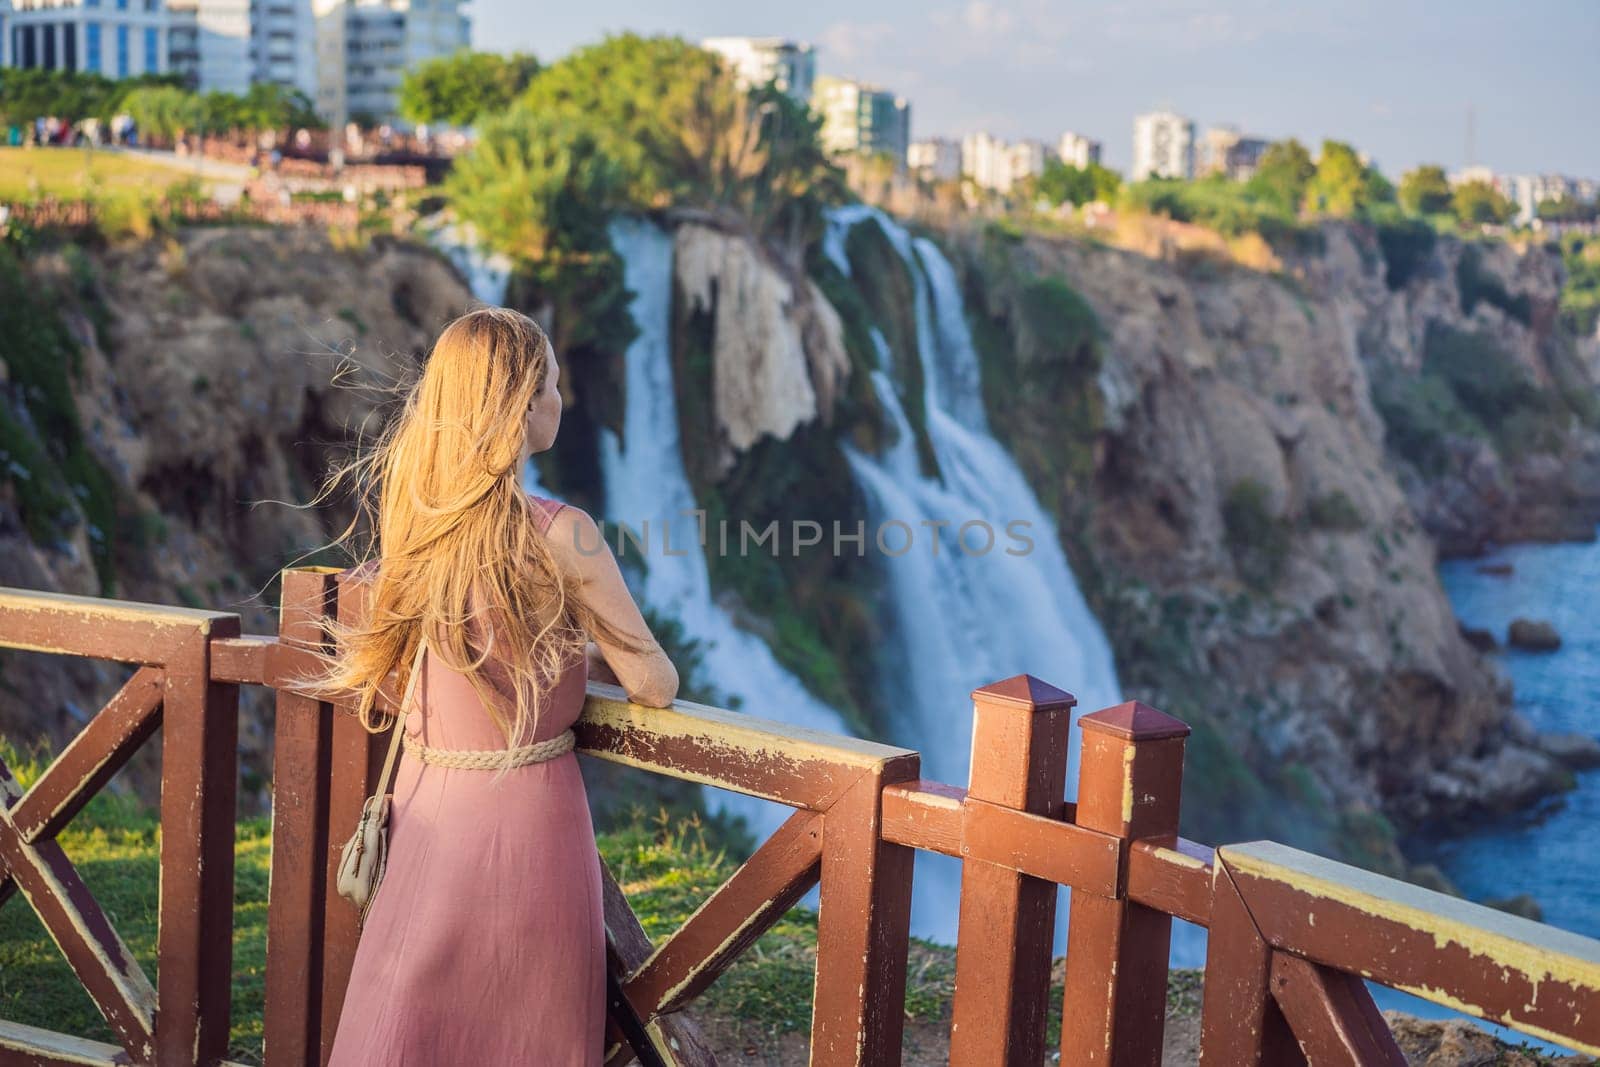 Beautiful woman with long hair on the background of Duden waterfall in Antalya. Famous places of Turkey. Lower Duden Falls drop off a rocky cliff falling from about 40 m into the Mediterranean Sea in amazing water clouds. Tourism and travel destination photo in Antalya, Turkey. Turkiye.